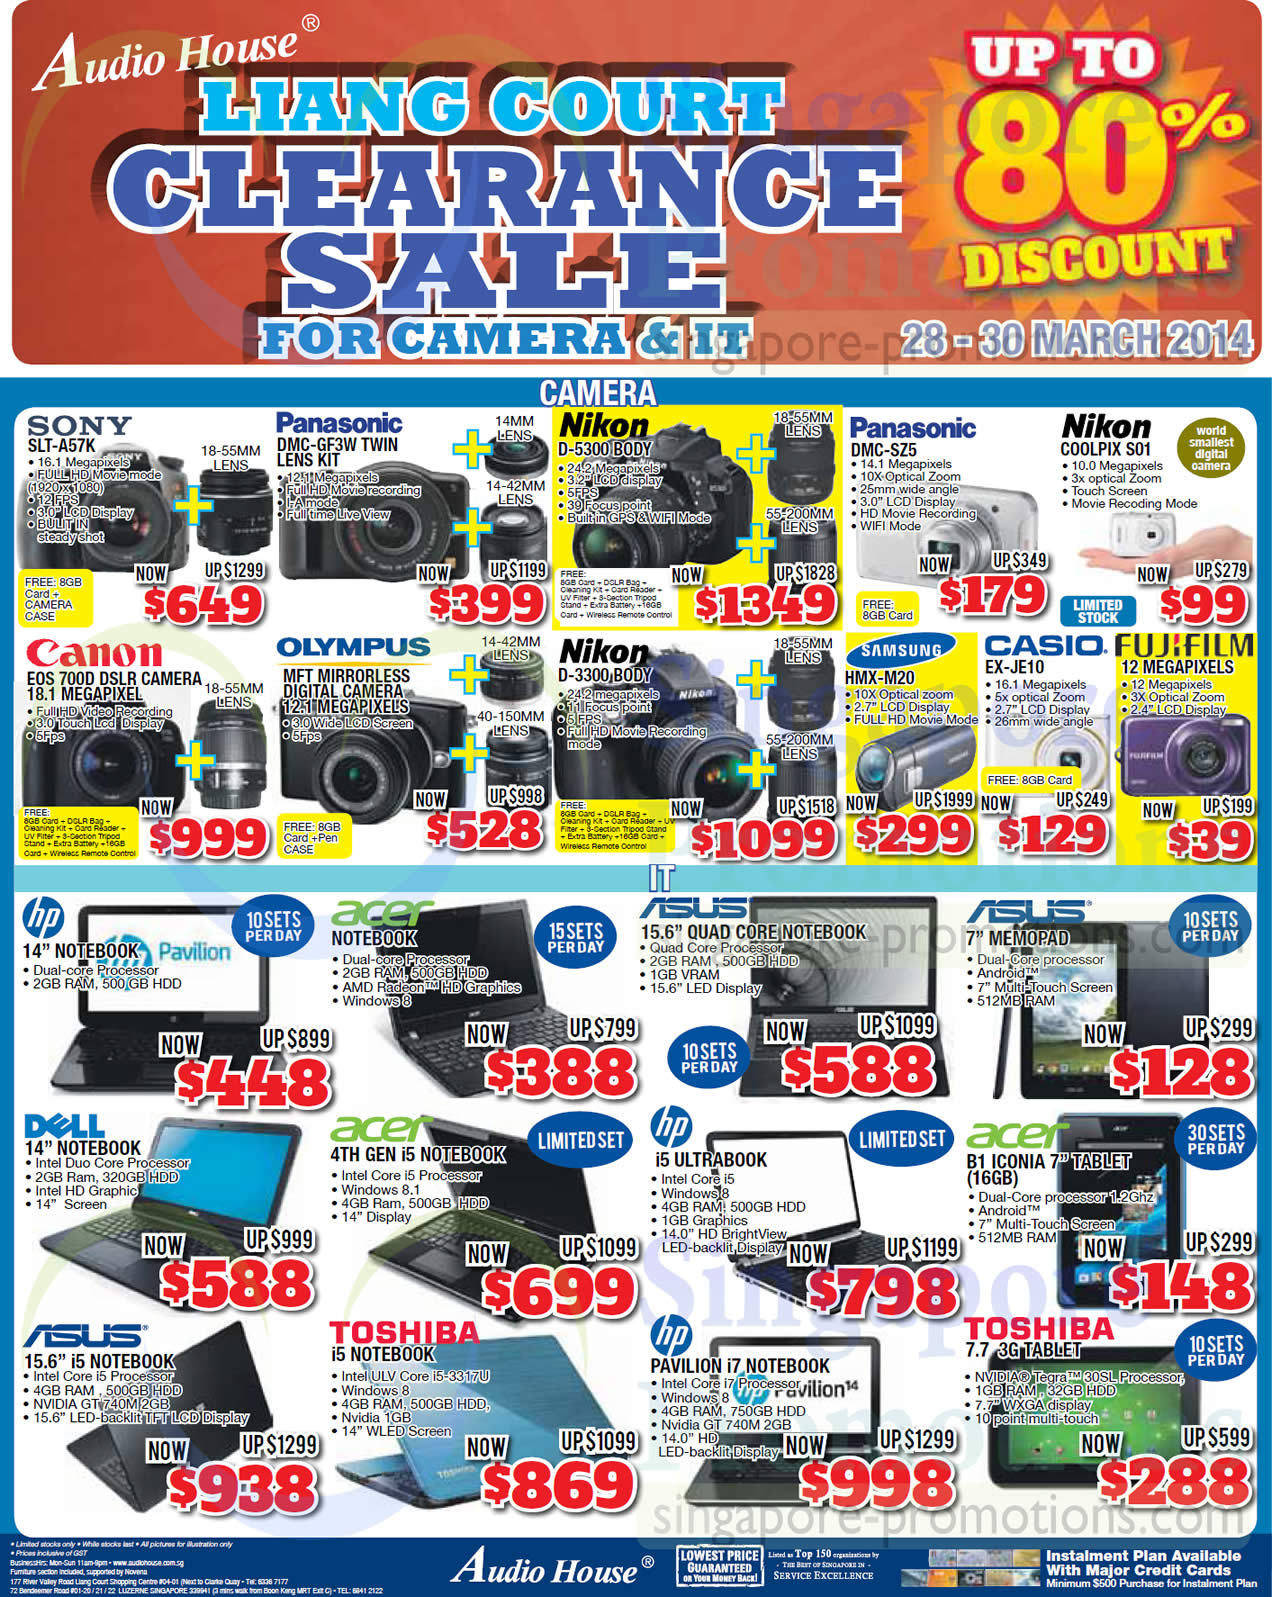 Featured image for Audio House Electronics, TV, Notebooks & Appliances Offers @ Liang Court 28 - 30 Mar 2014